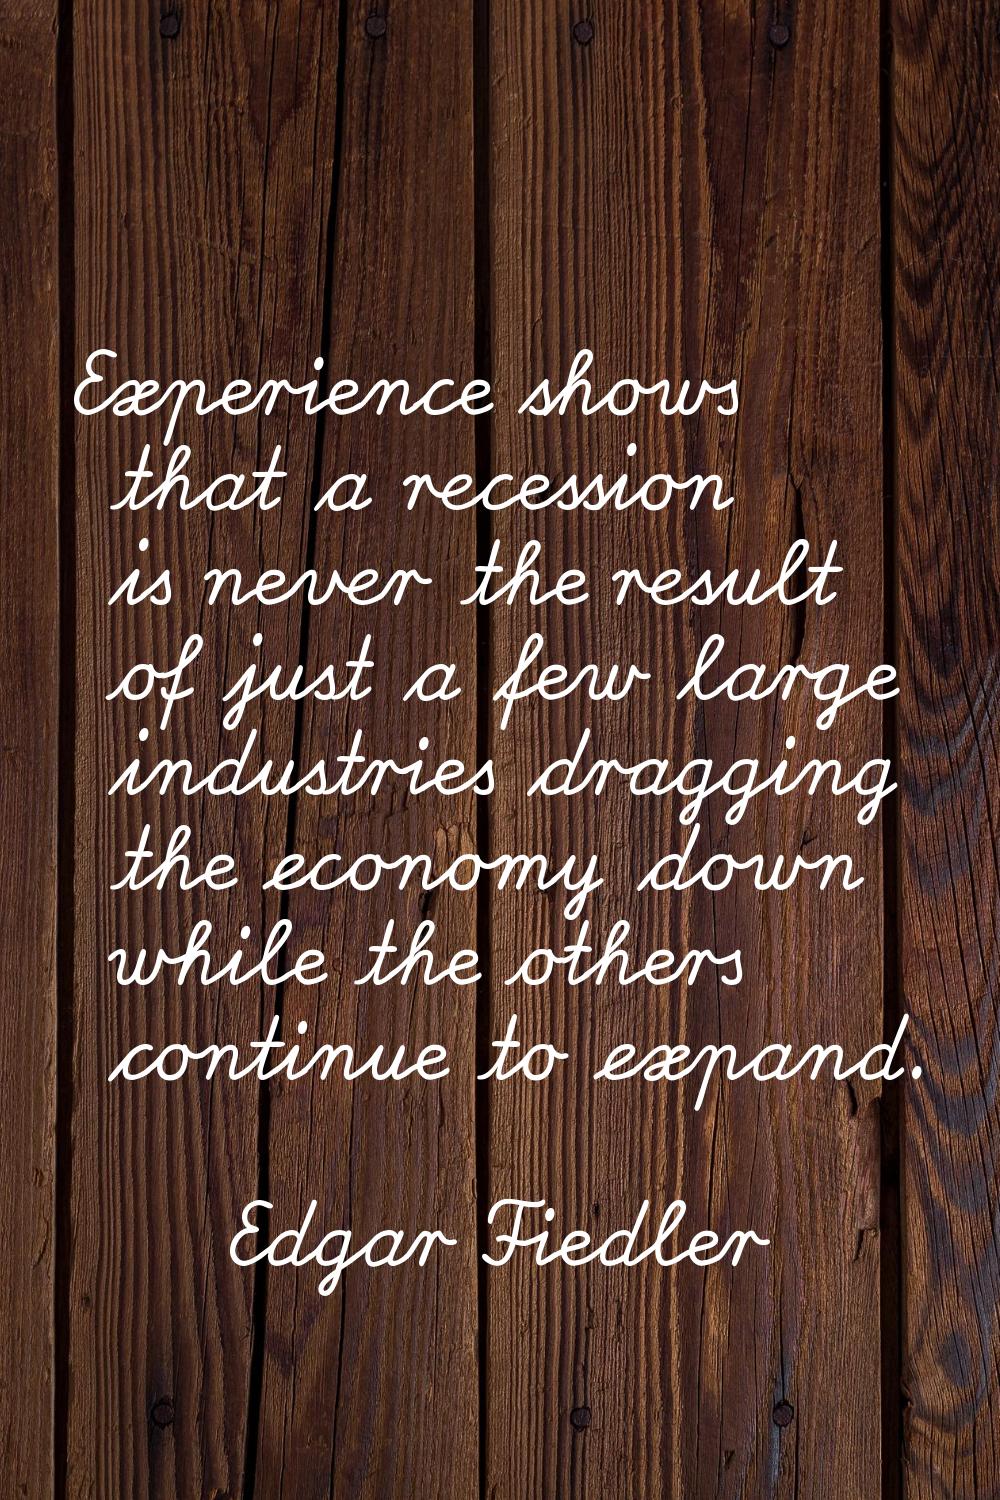 Experience shows that a recession is never the result of just a few large industries dragging the e